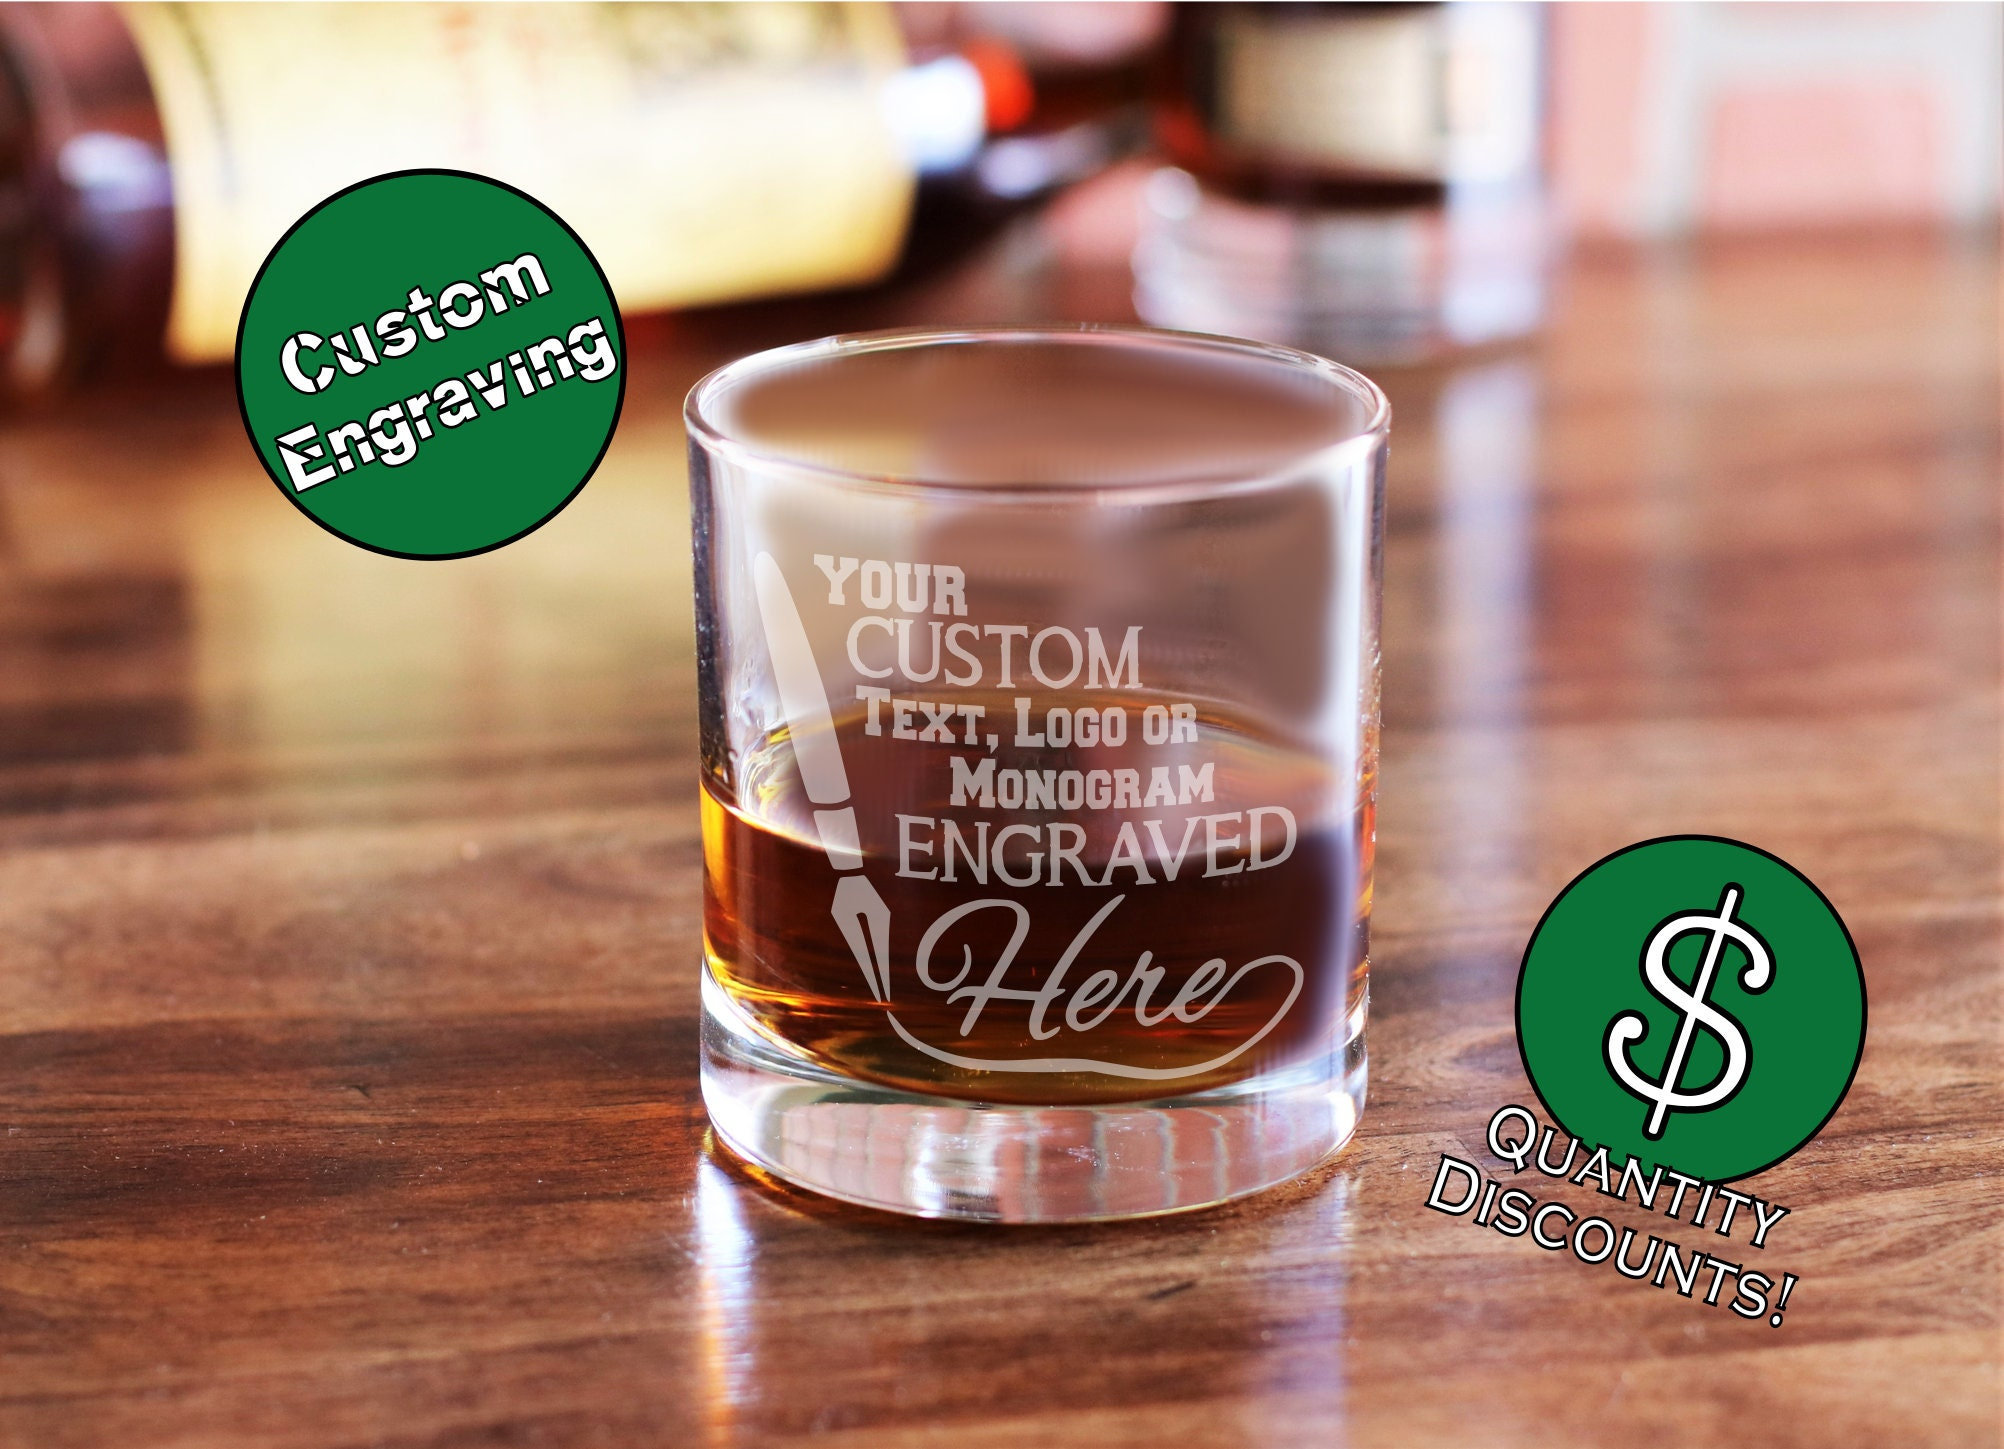 Personalized Rock Whiskey 2x Glasses with Vintage Text Logo Set of 2 glasses 